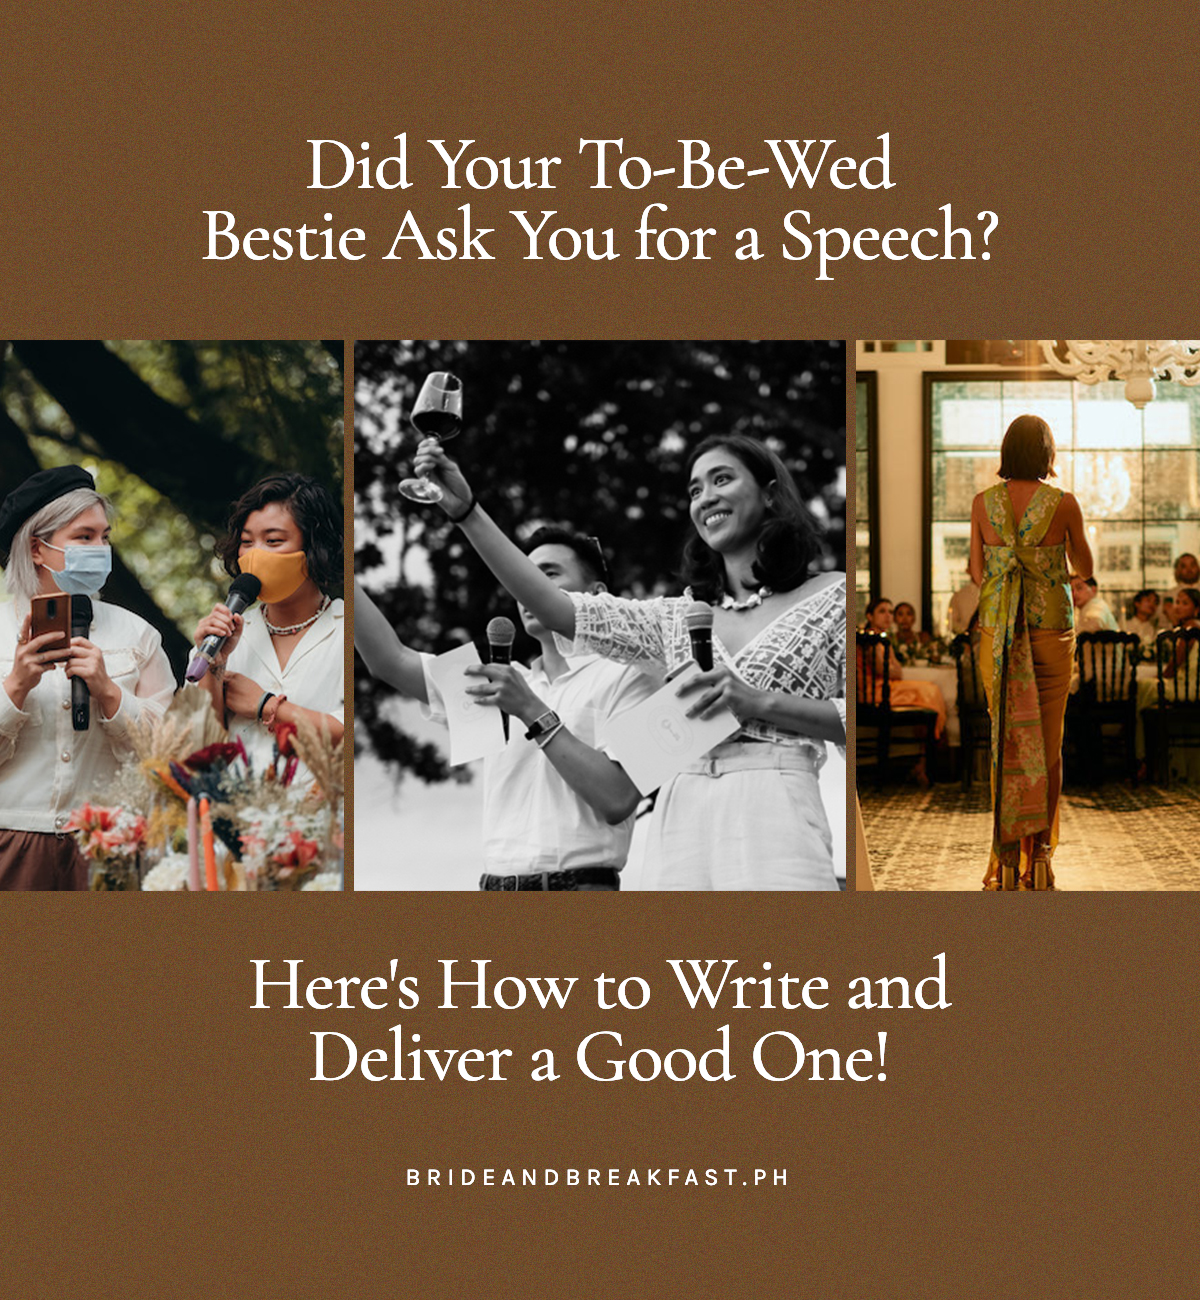 Did Your To-Be-Wed Bestie Ask You for a Speech? Here's How to Write and Deliver a Good One!